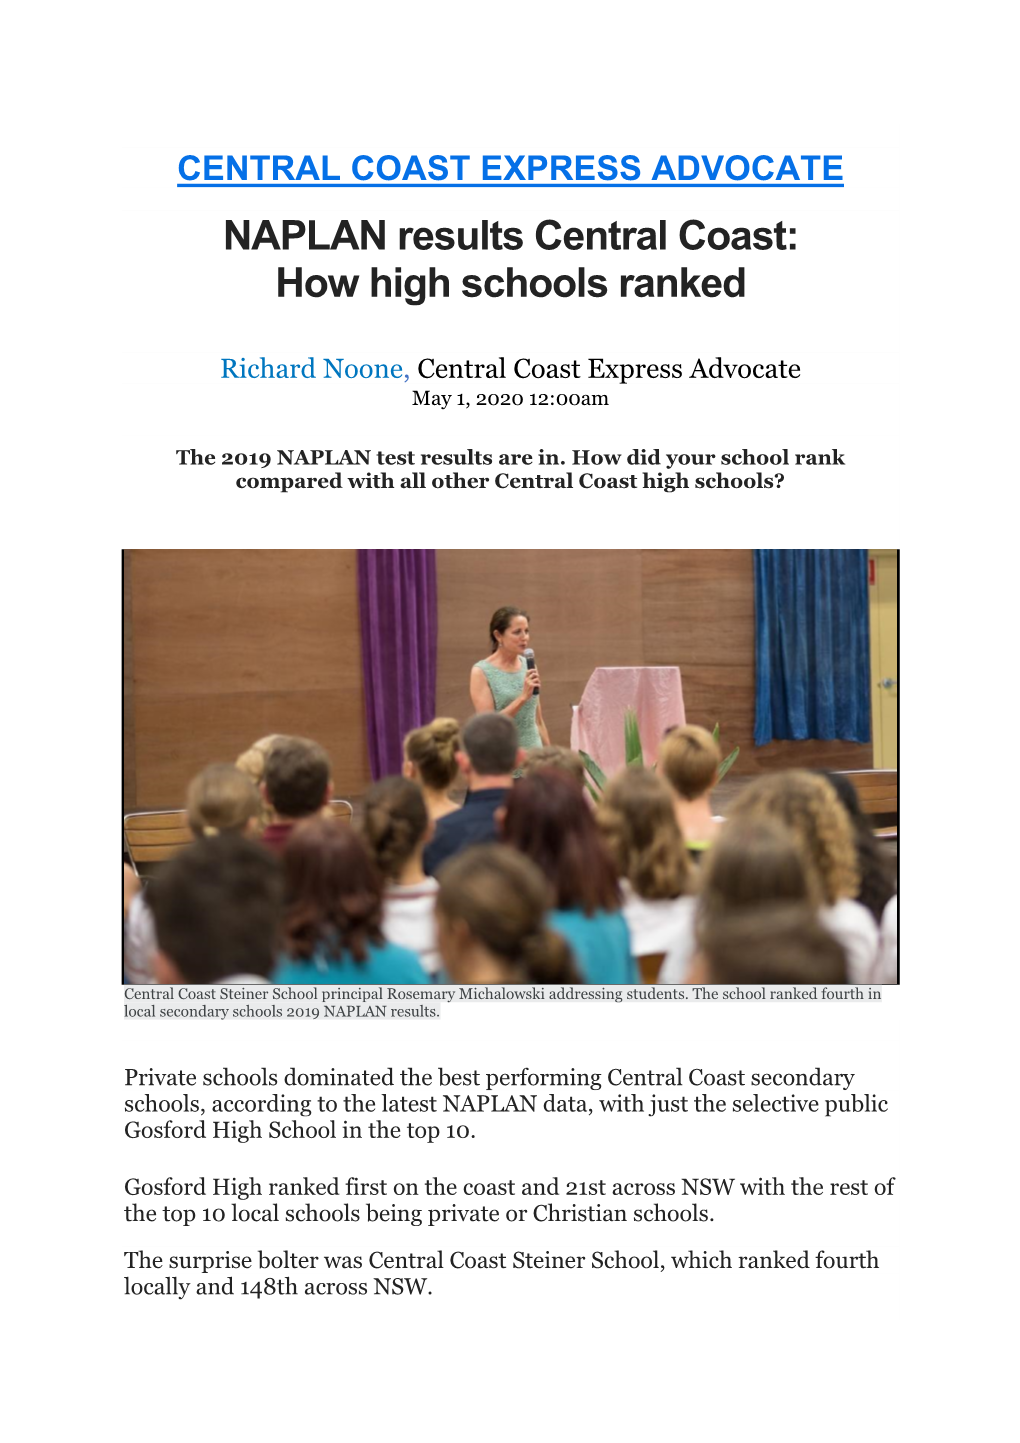 NAPLAN Results Central Coast: How High Schools Ranked